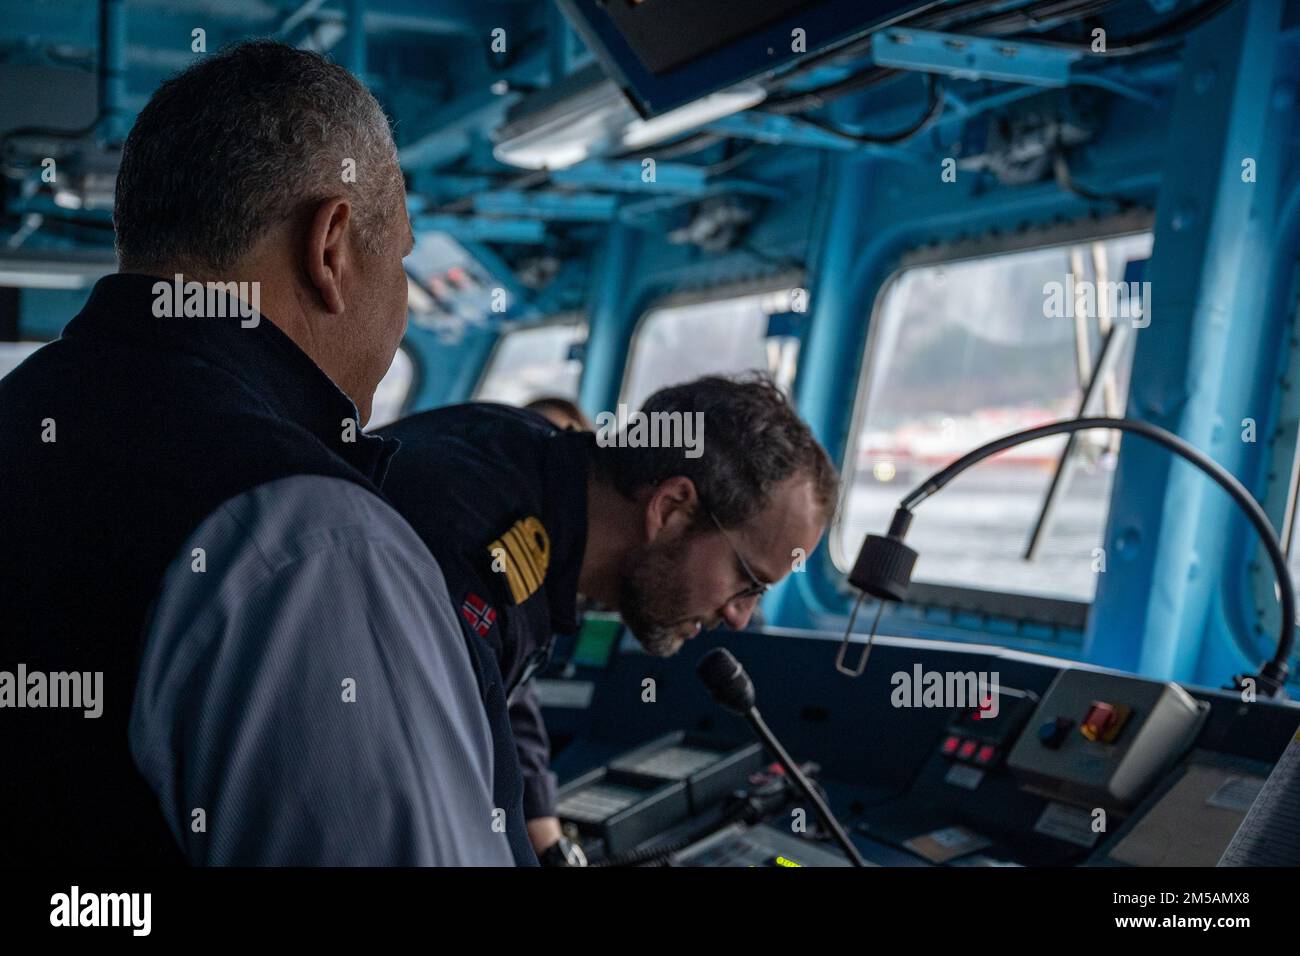 BERGEN, Norway (Feb. 16, 2022) — Secretary of the Navy Carlos Del Toro prepares to address the crew of HNoMS Thor Heyerdahl (F314) over the ship’s loudspeaker with Norwegian Cmdr. Lars Ole Høknes, commanding officer of Heyerdahl, in Bergen, Norway, Feb. 16, 2022. Secretary Del Toro is in Norway to visit U.S. service members and Norwegian government leaders to reinforce existing bilateral and multilateral security relationships between the U.S. Navy and the Royal Norwegian Navy. Stock Photo